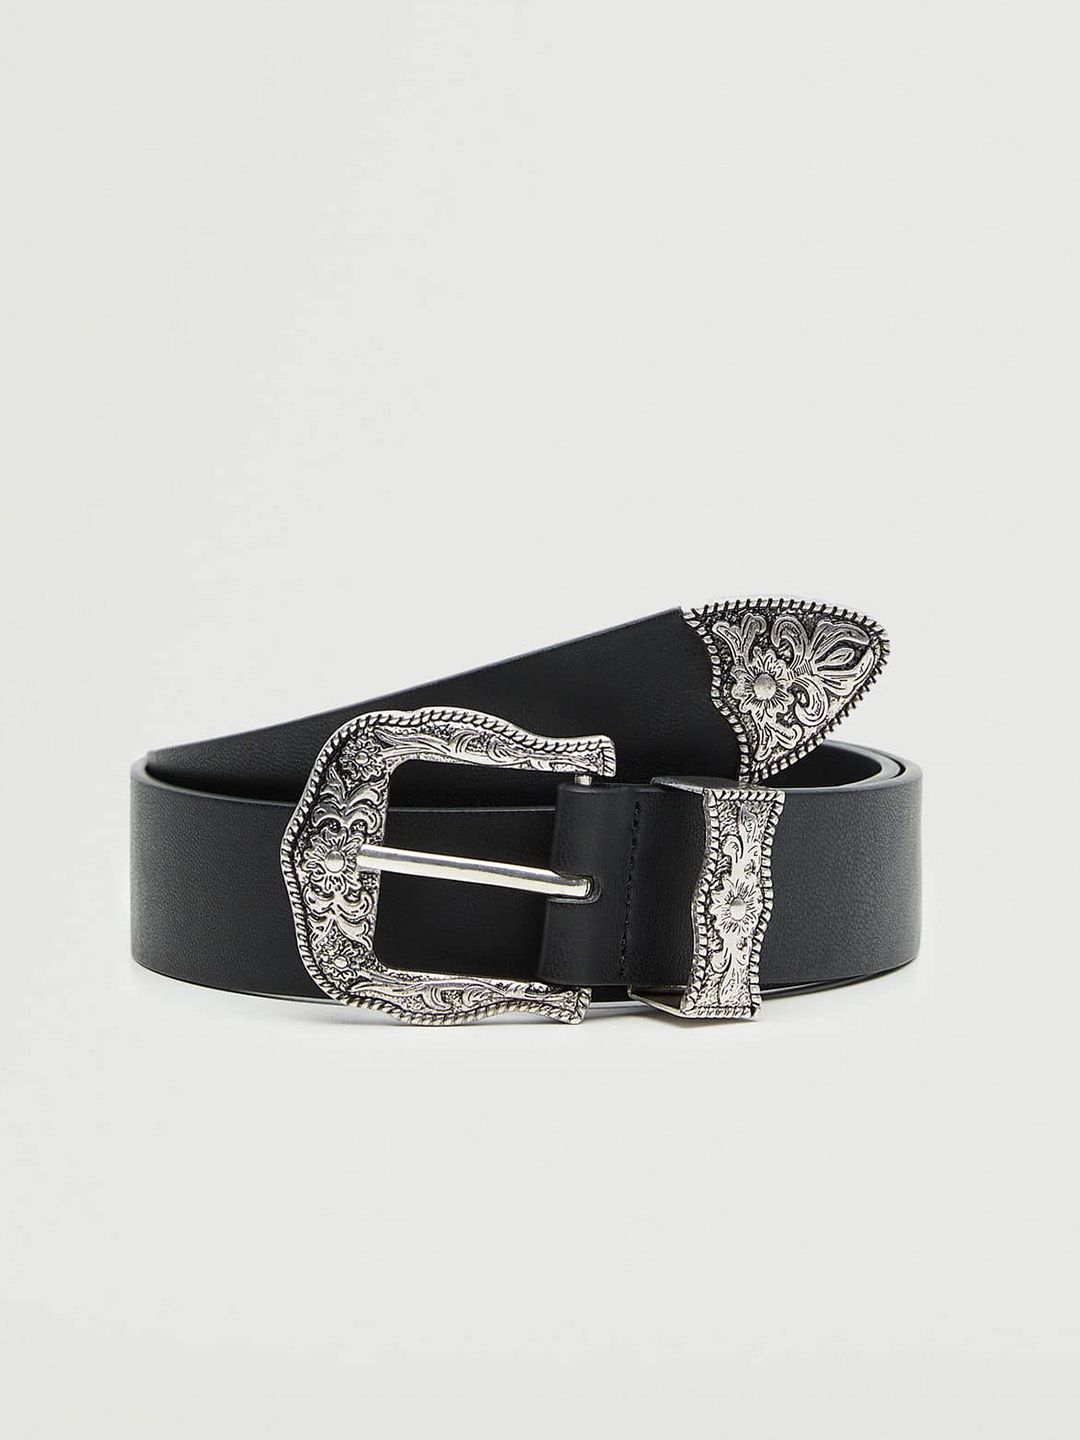 MANGO Women Black & Silver-Toned Solid Belt Price in India